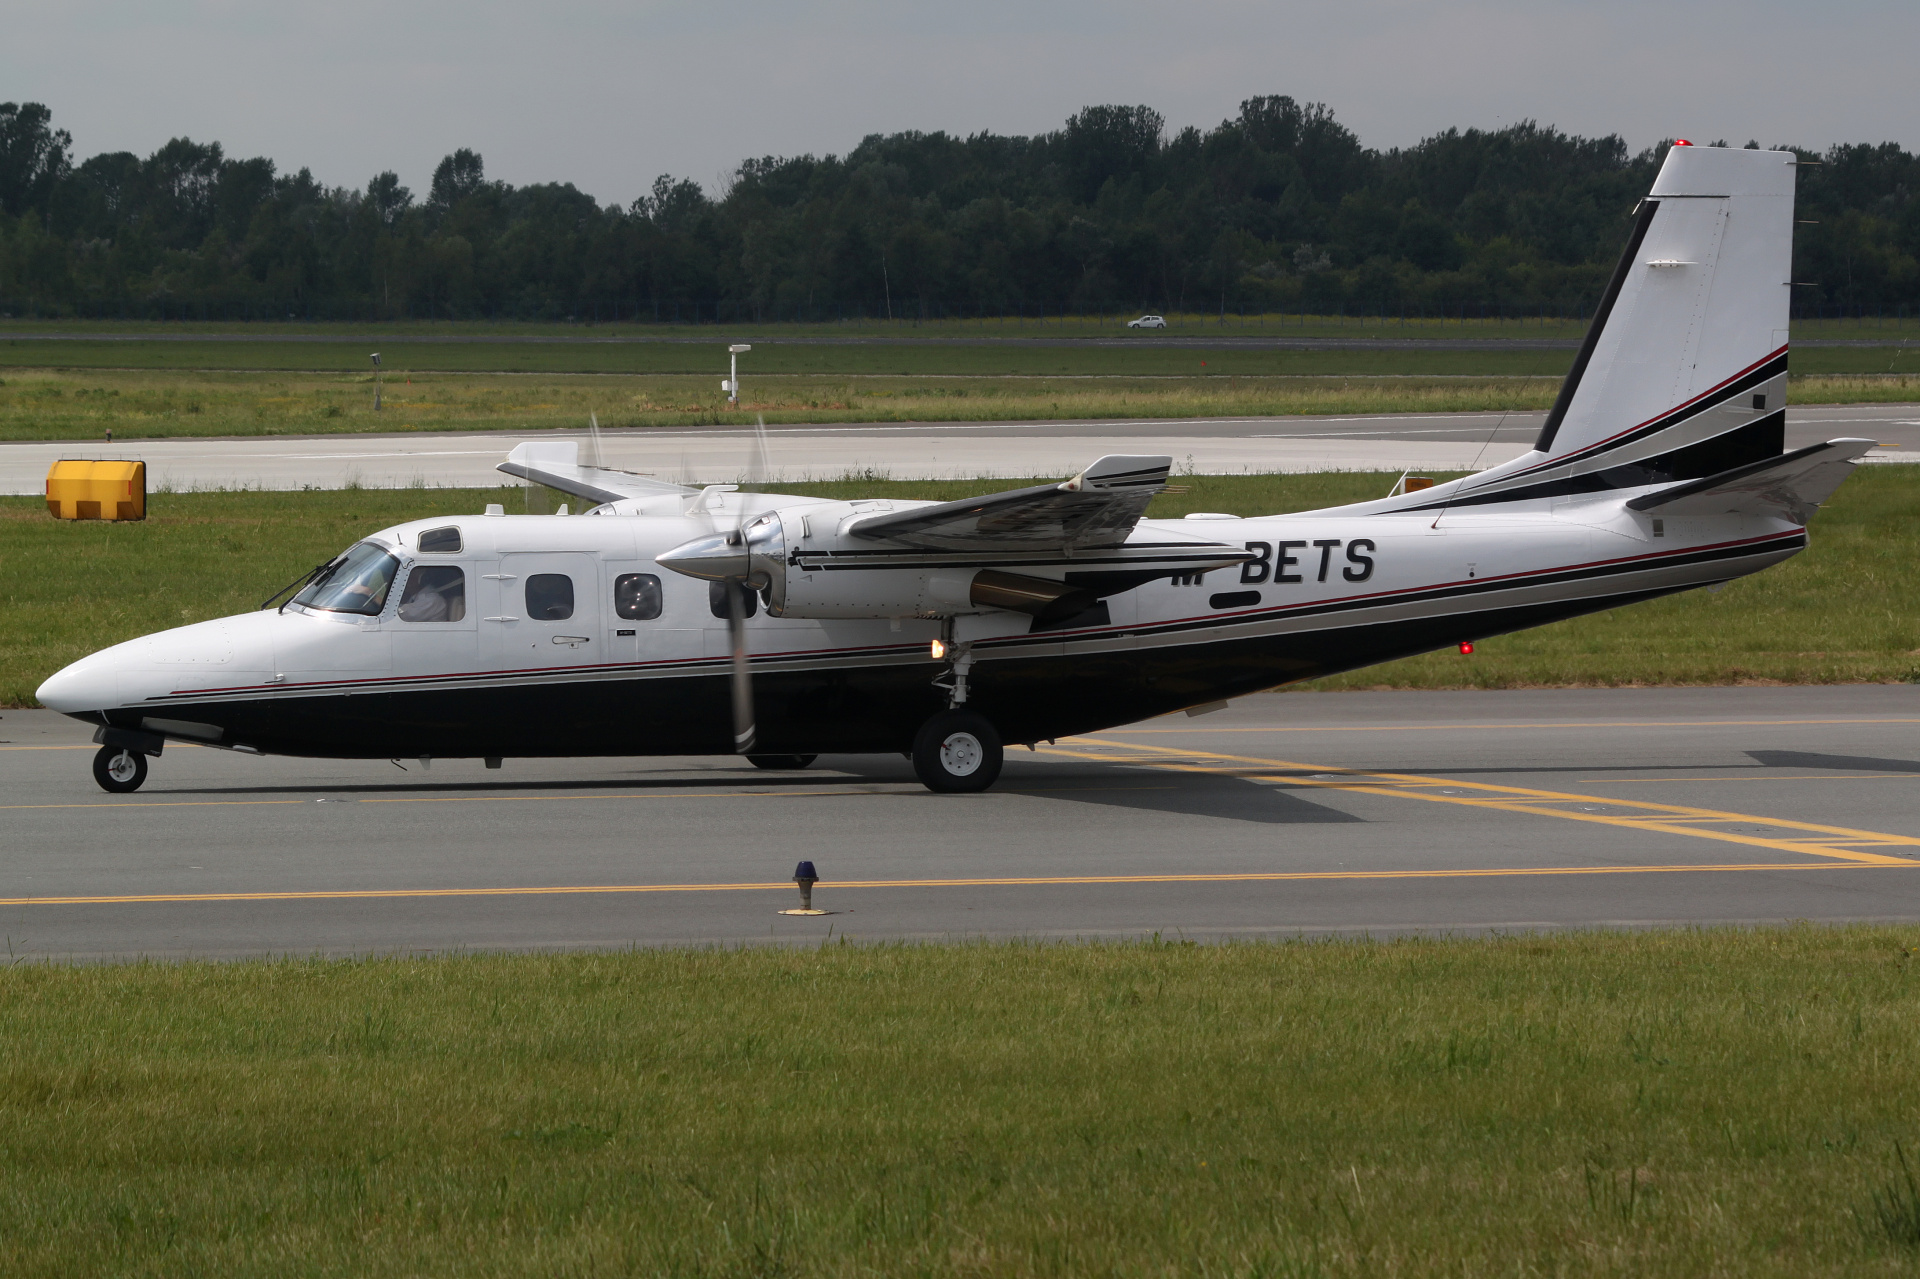 Rockwell 695A Jetprop 1000, M-BETS, private (Aircraft » EPWA Spotting » Aero Commander and revisions)